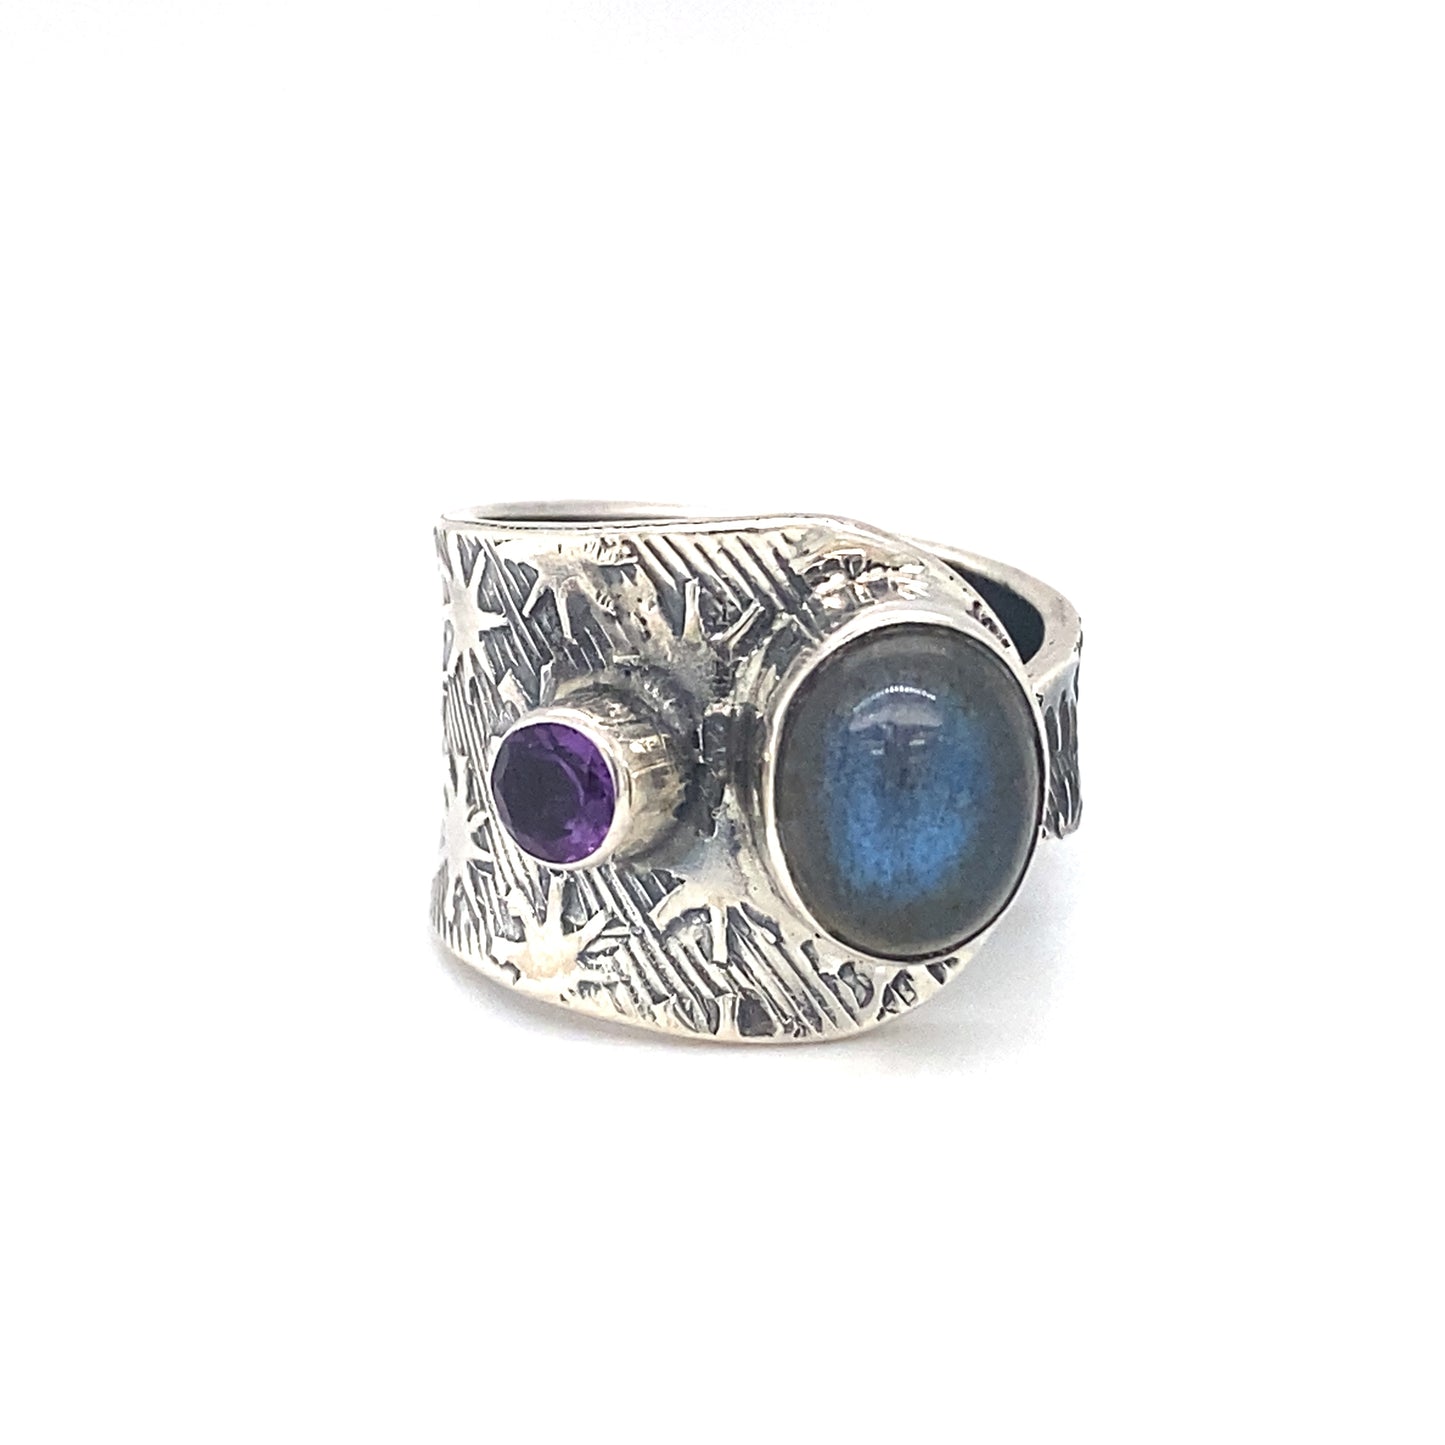 Circa 1990s Labradorite and Amethyst Adjustable Ring in Sterling Silver